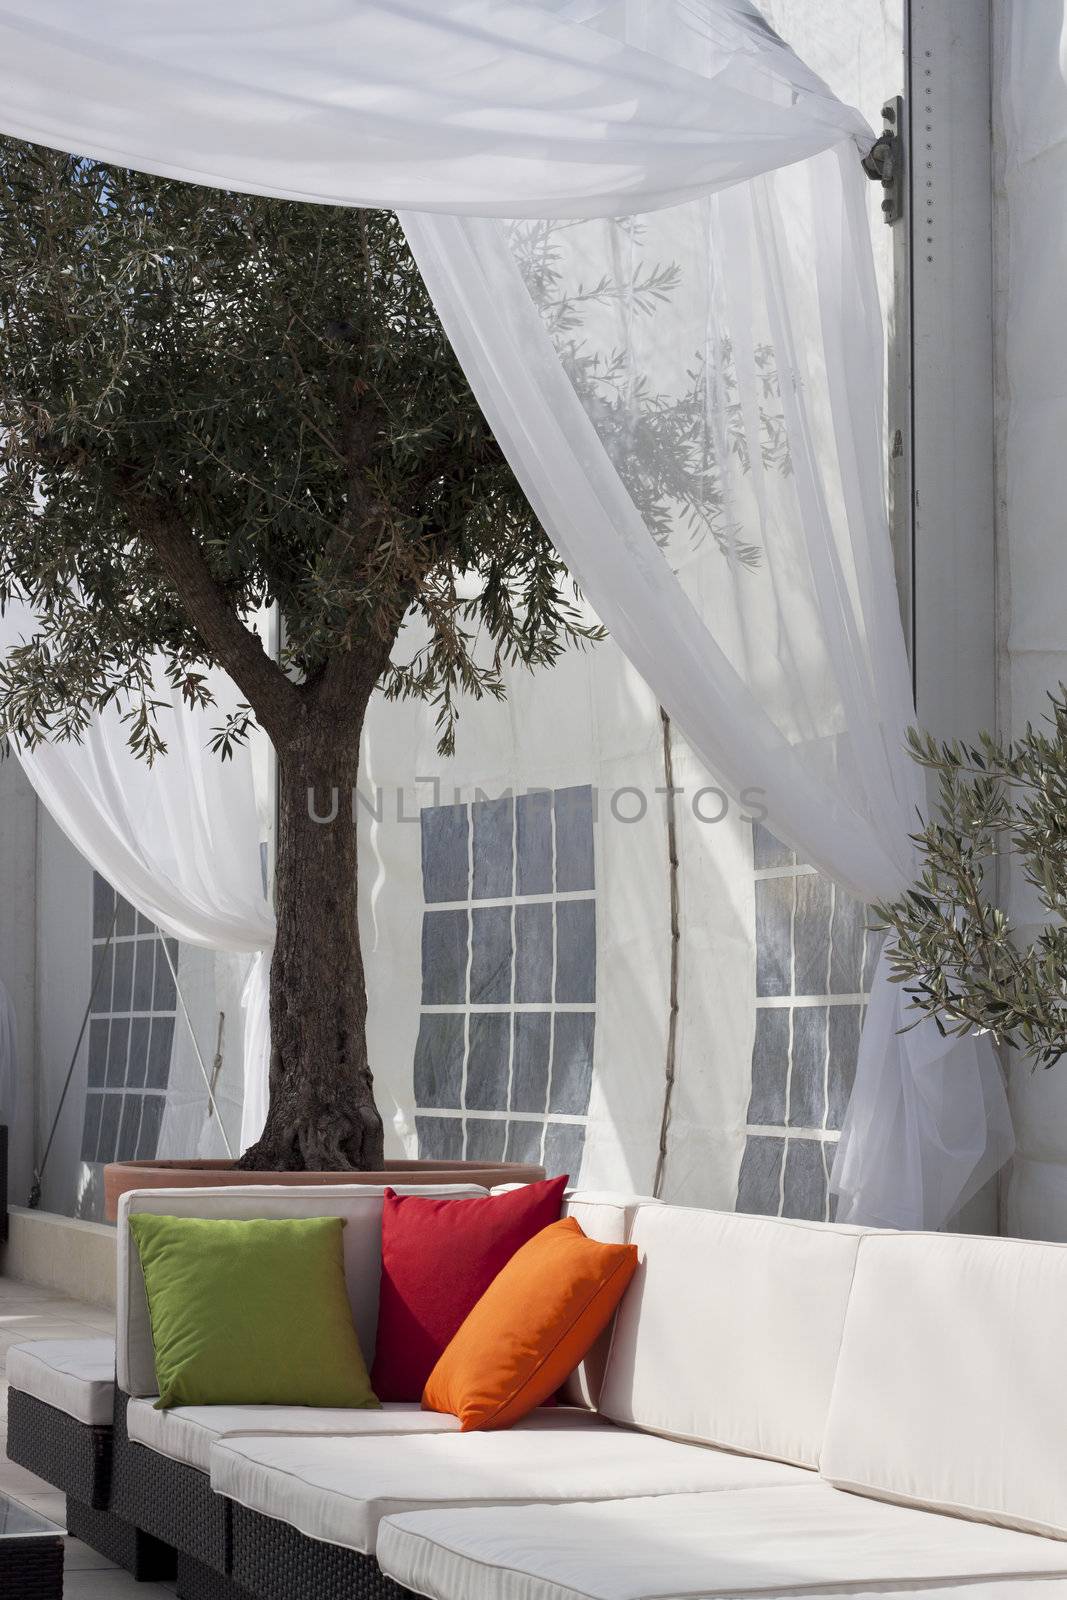 Rattan sofa in a lounge with a giant olive tree in a ceramic pot